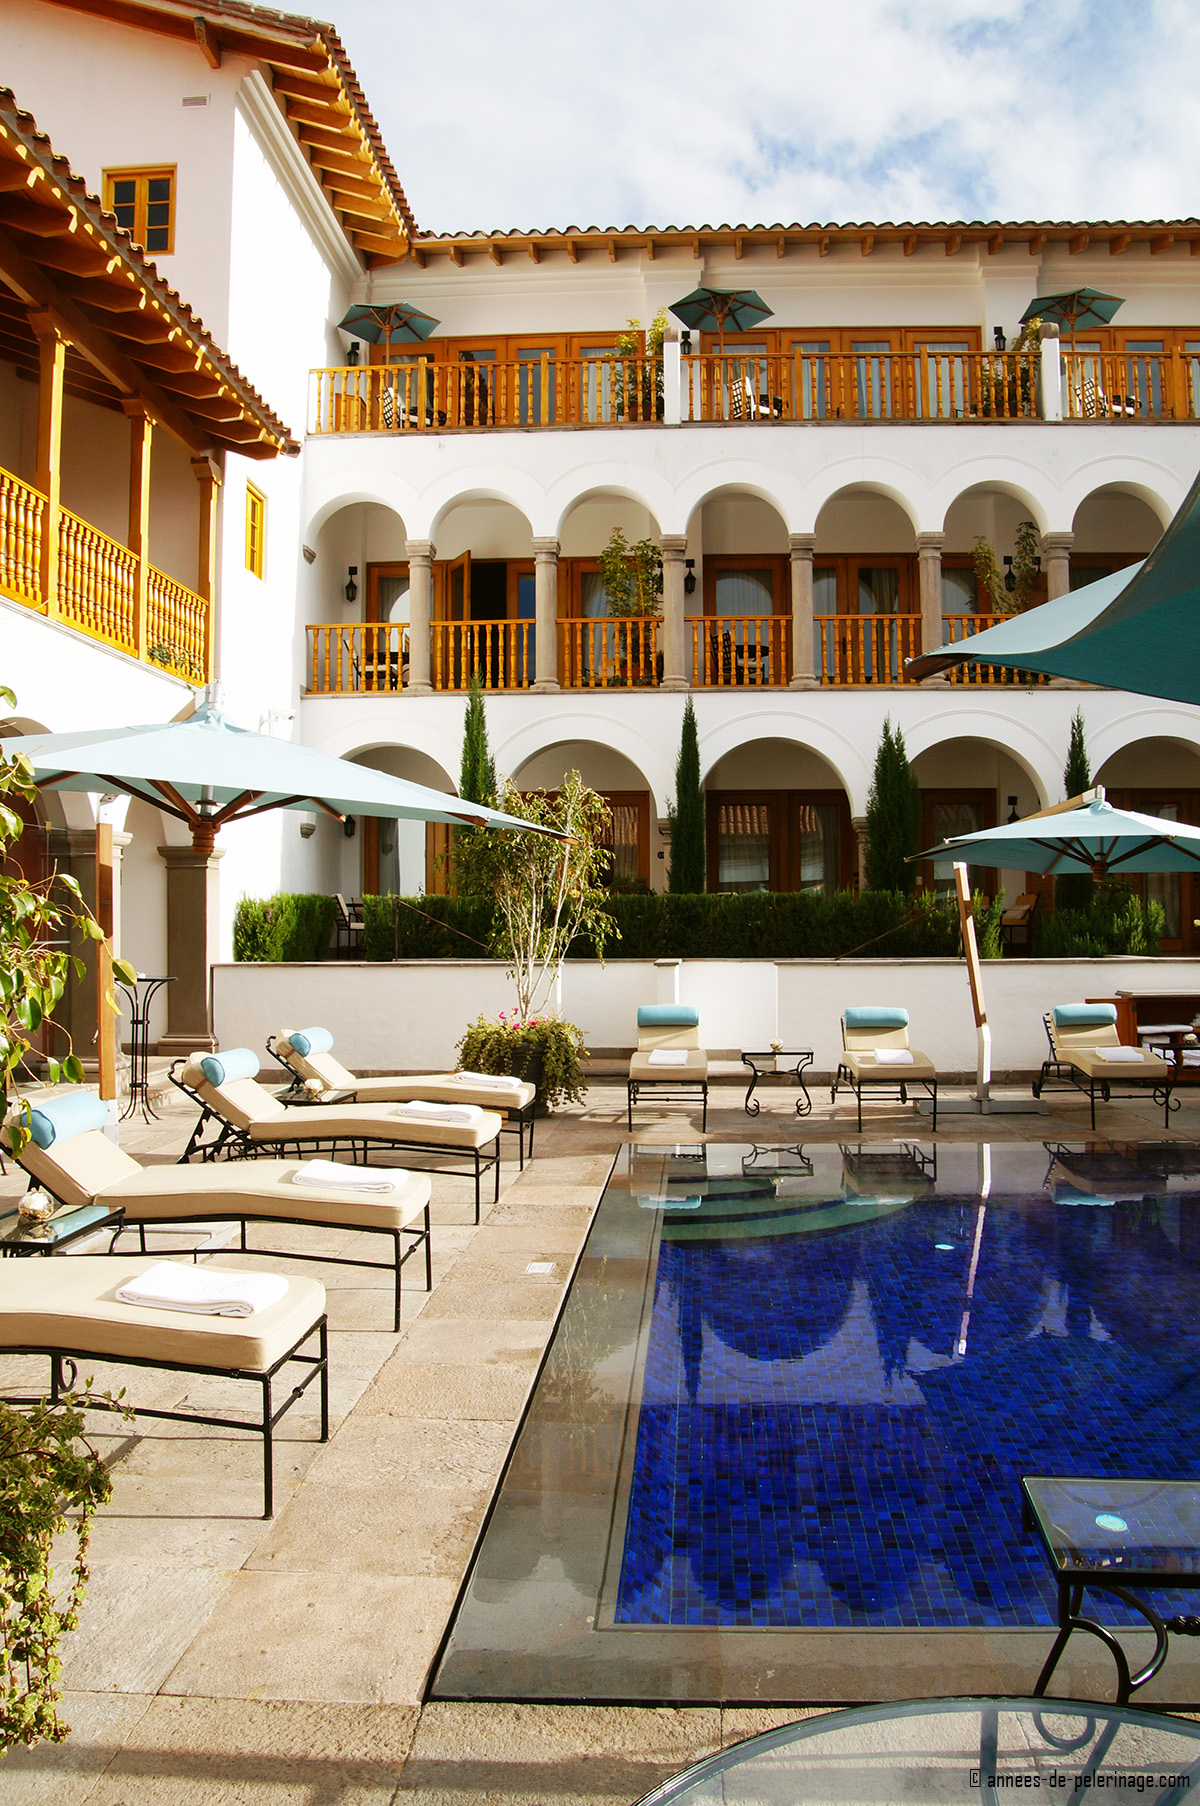 The famous pool at the Belmond Palacio Nazarenas luxury boutique hotel in Cusco